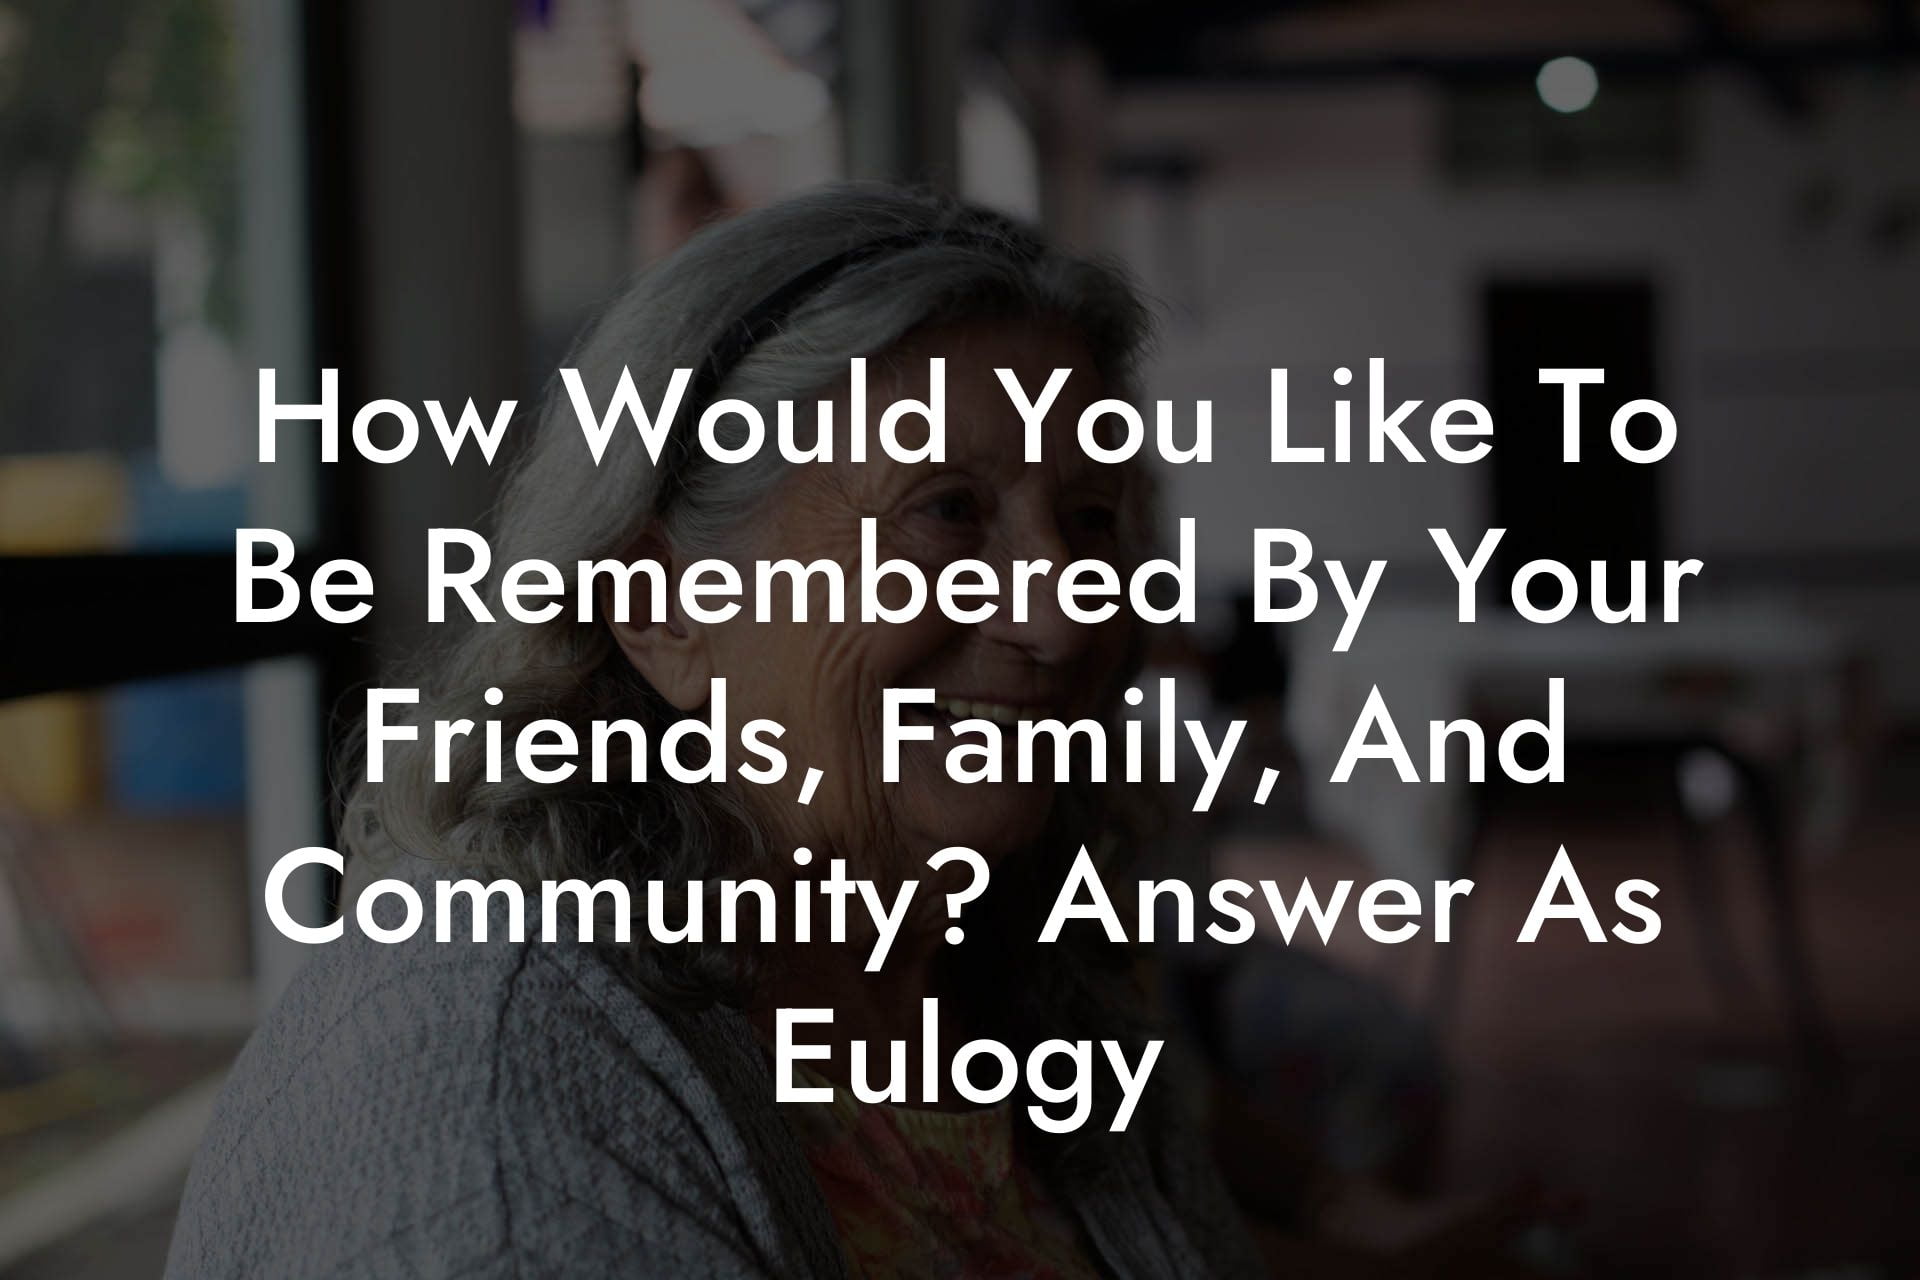 How Would You Like To Be Remembered By Your Friends, Family, And Community? Answer As Eulogy